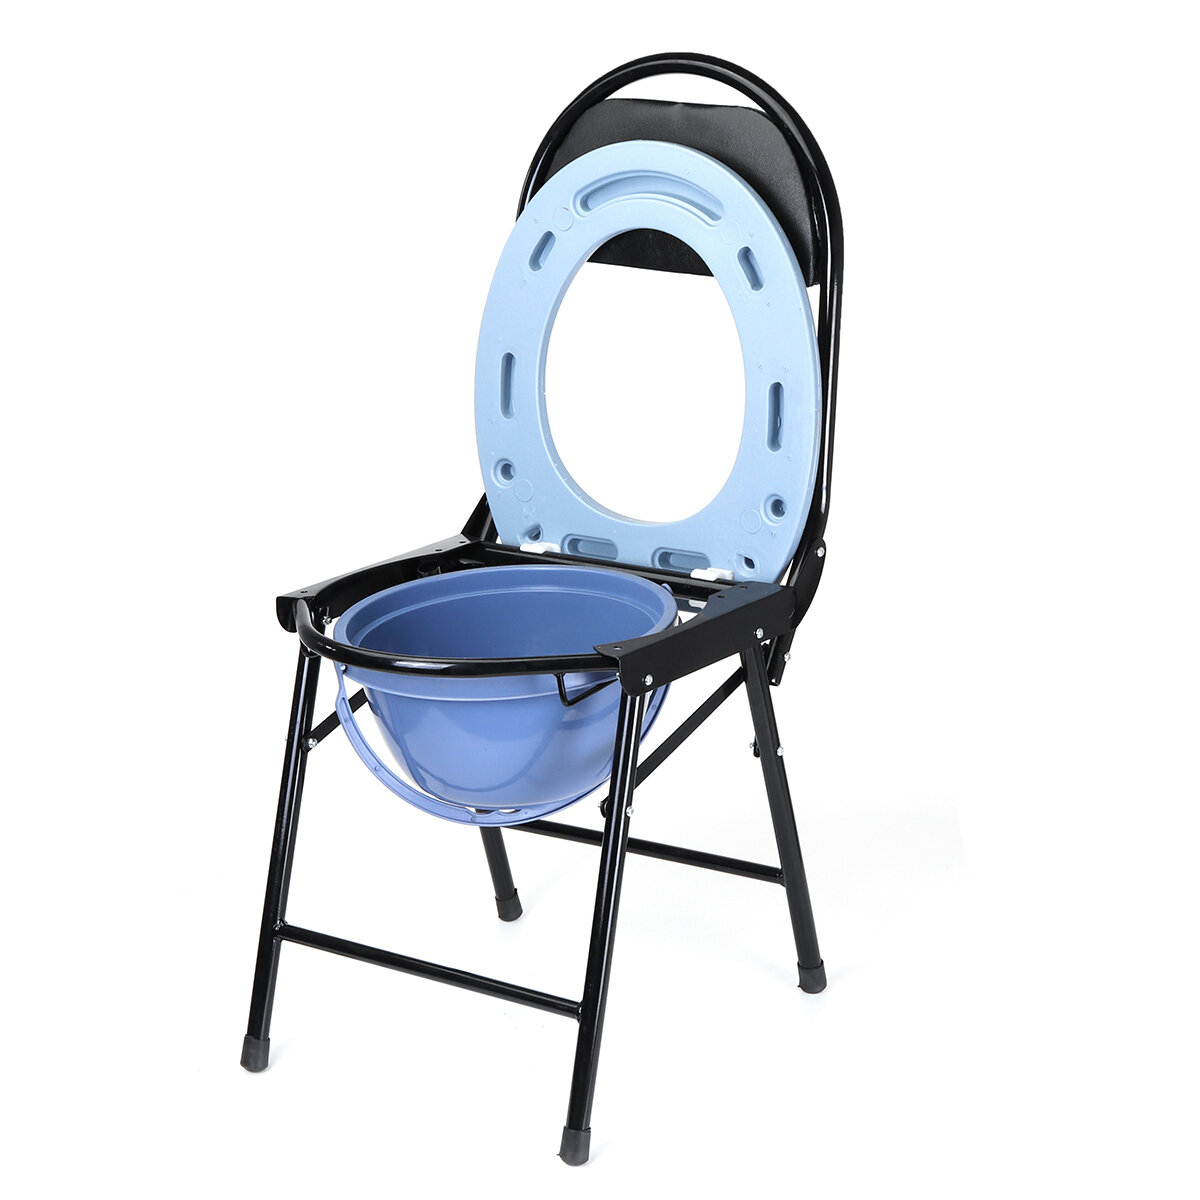 35x39x78cm Folding Commode Potty Chair Steel Plastic Chair for The Elderly Gravid